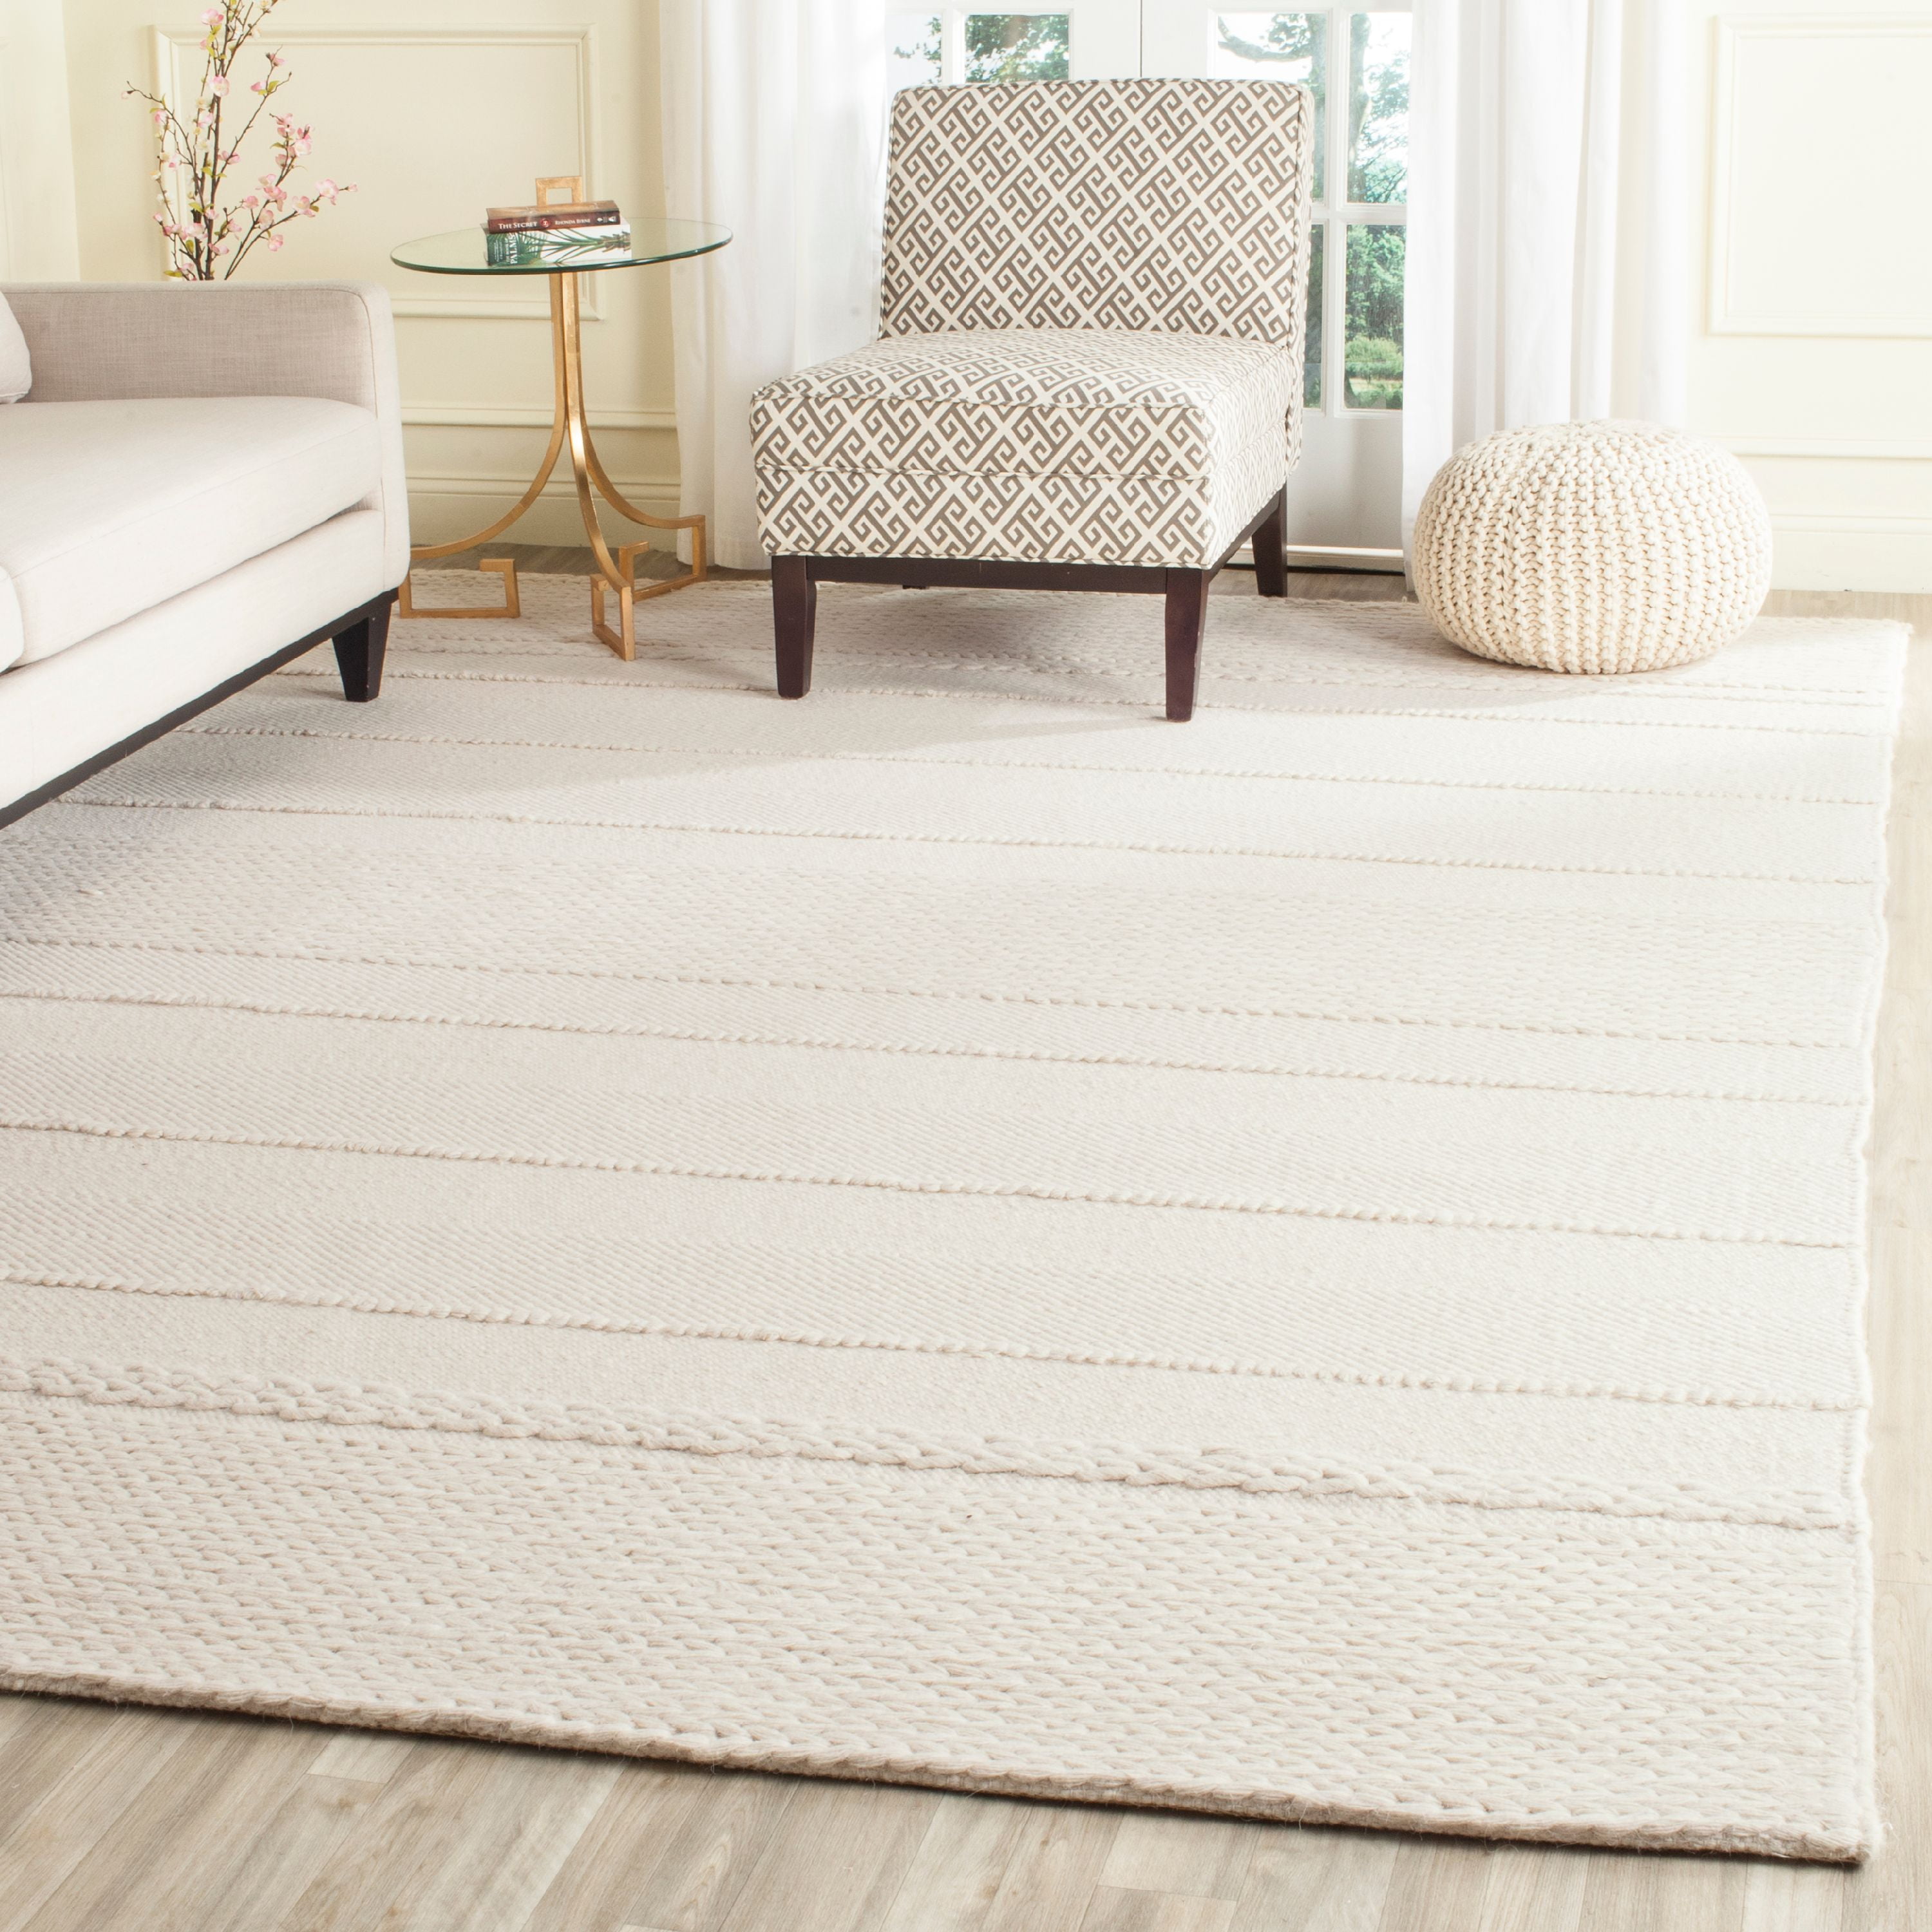 Safavieh Natura Avery Solid Striped, 9 215 12 Dining Room Rugs